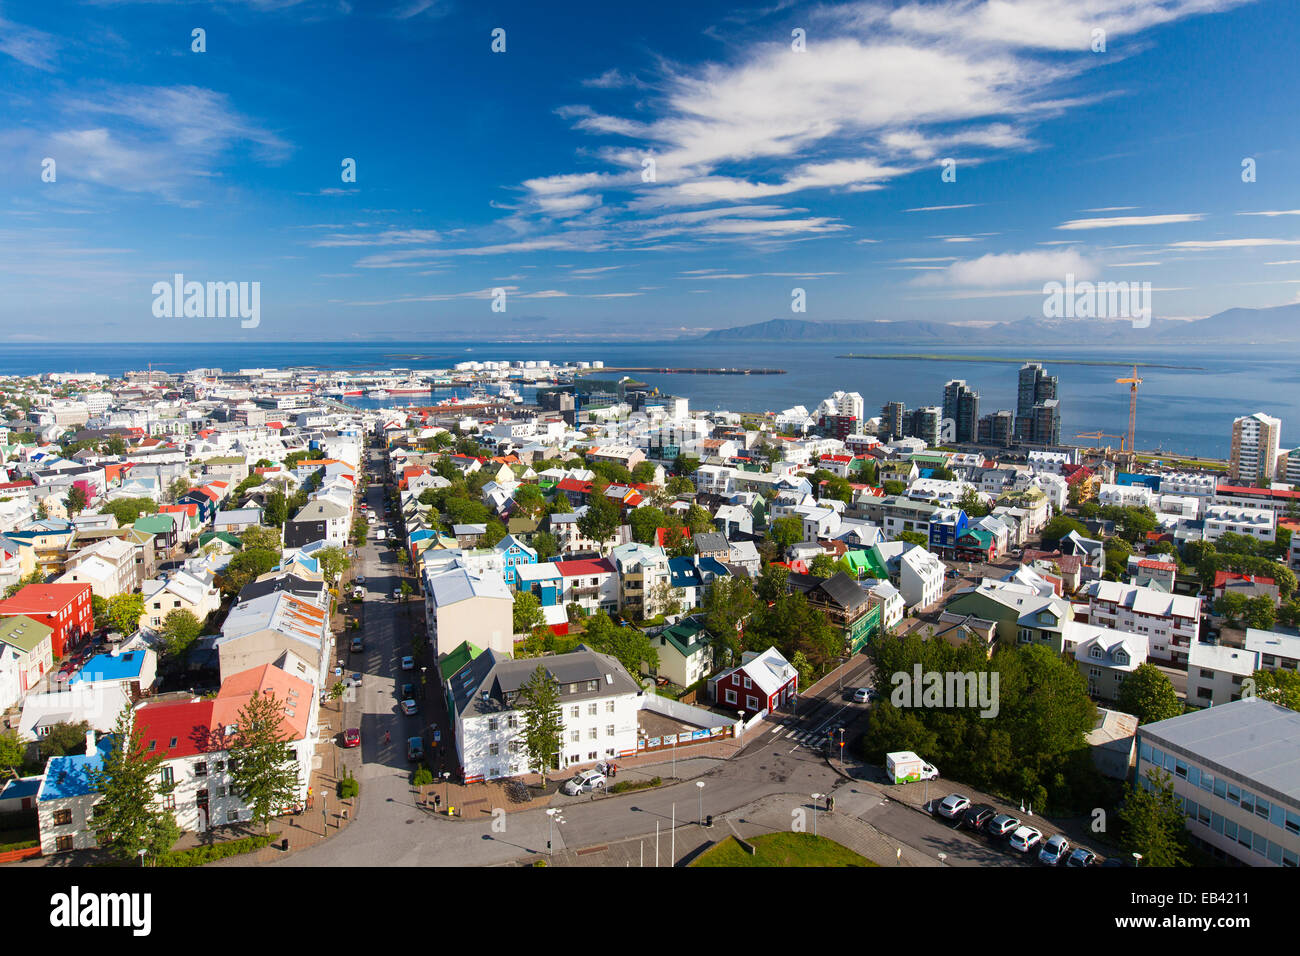 view of downtown Reykjavik from the top of Hallgrímskirkja, Iceland Stock Photo